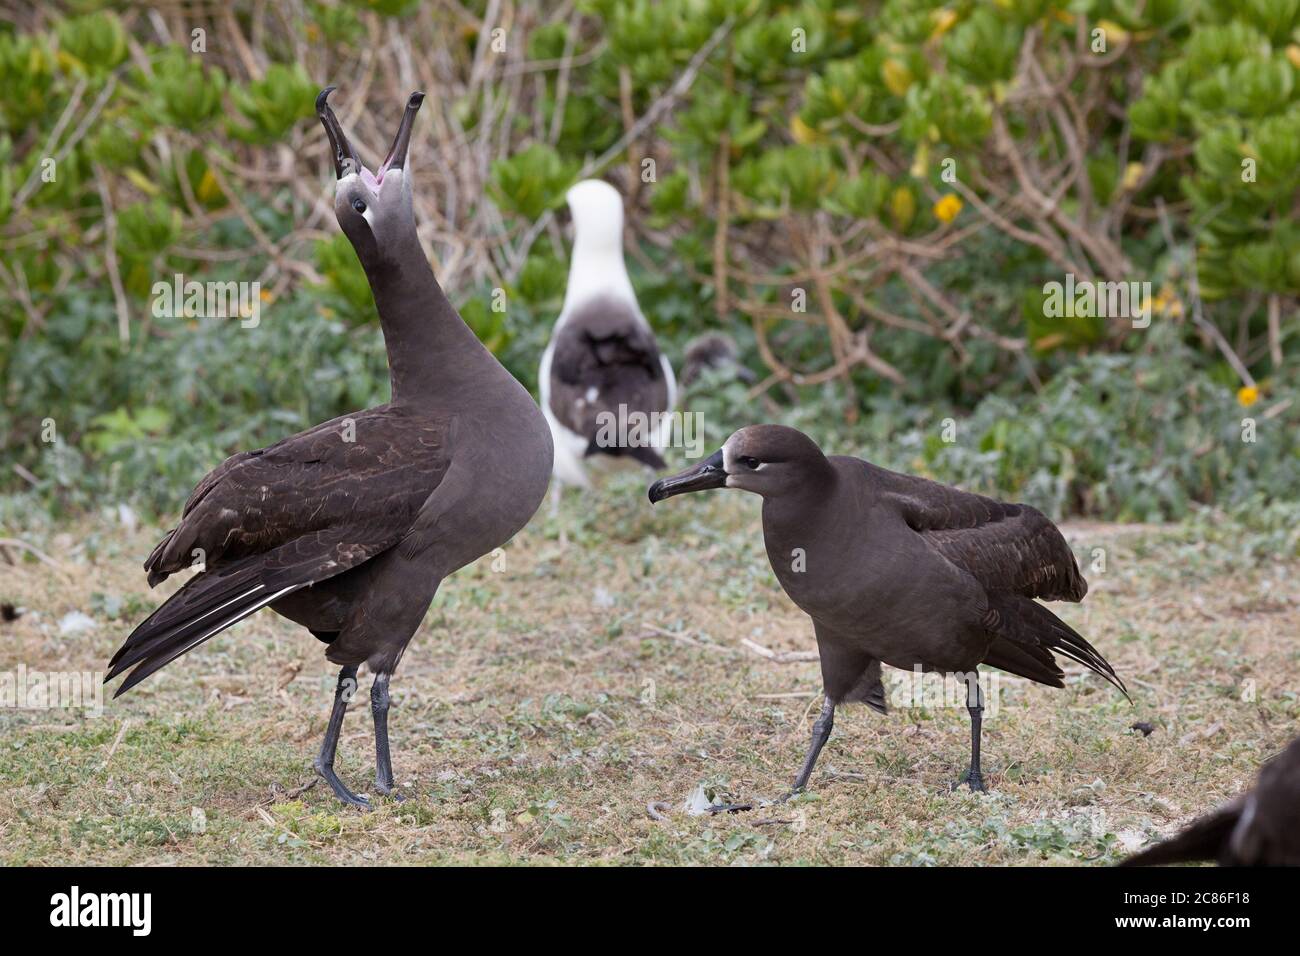 black-footed albatross, Phoebastria nigripes (formerly Diomedea nigripes), sky calling during courtship dance, Sand Island, Midway Atoll, Midway NMR Stock Photo